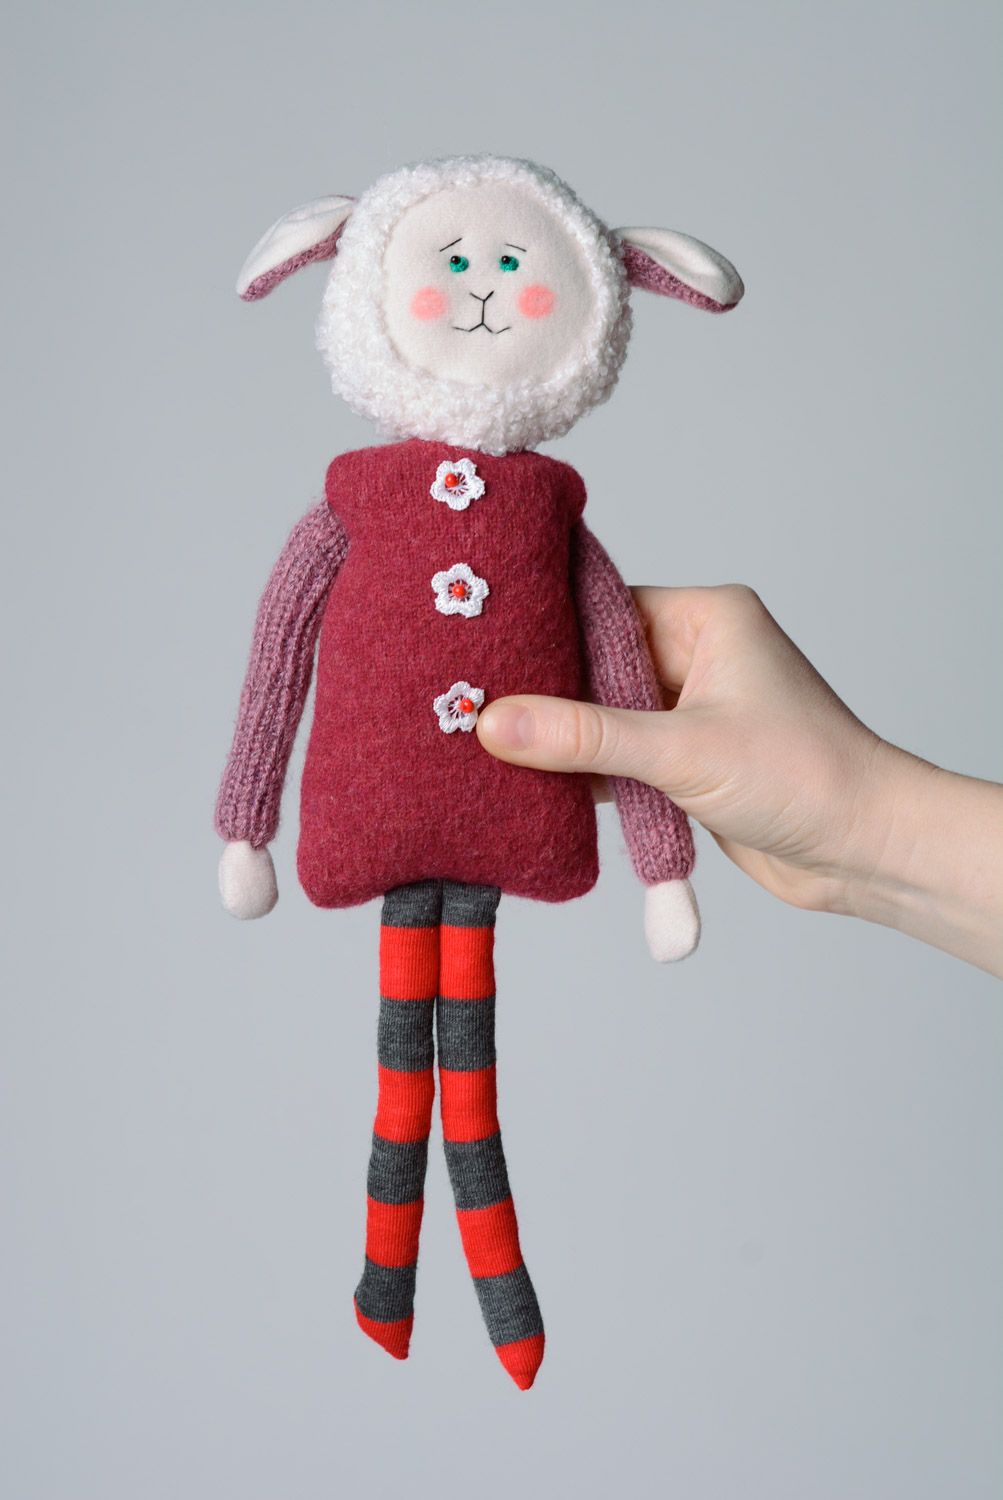 Cute handmade soft toy sewn of jersey and wool in the shape of lamb in coat photo 3